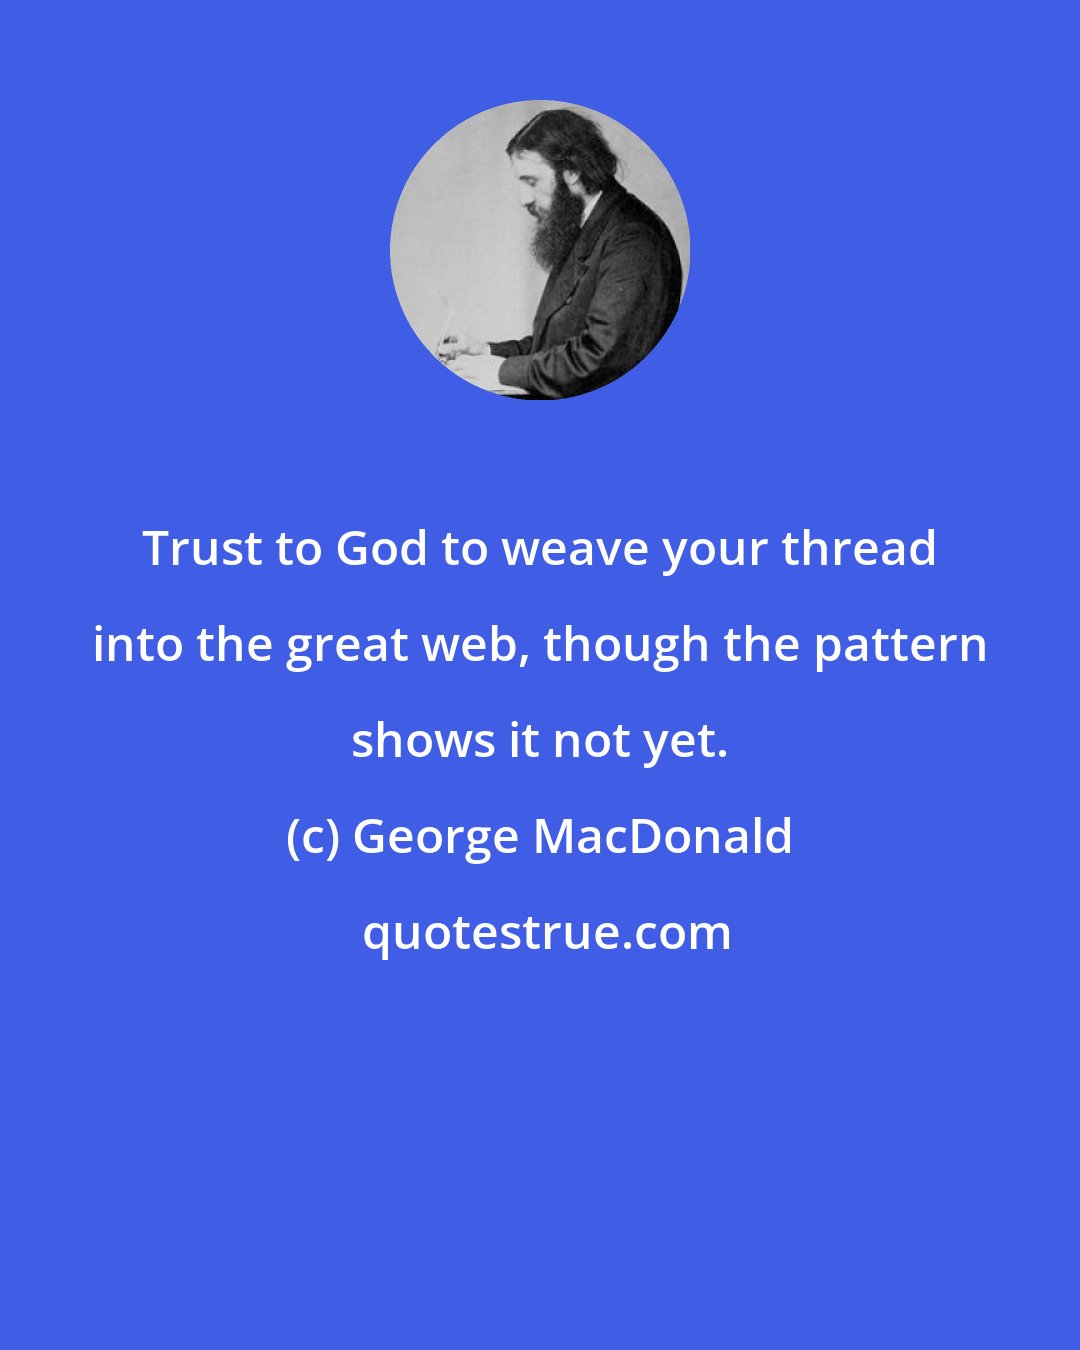 George MacDonald: Trust to God to weave your thread into the great web, though the pattern shows it not yet.